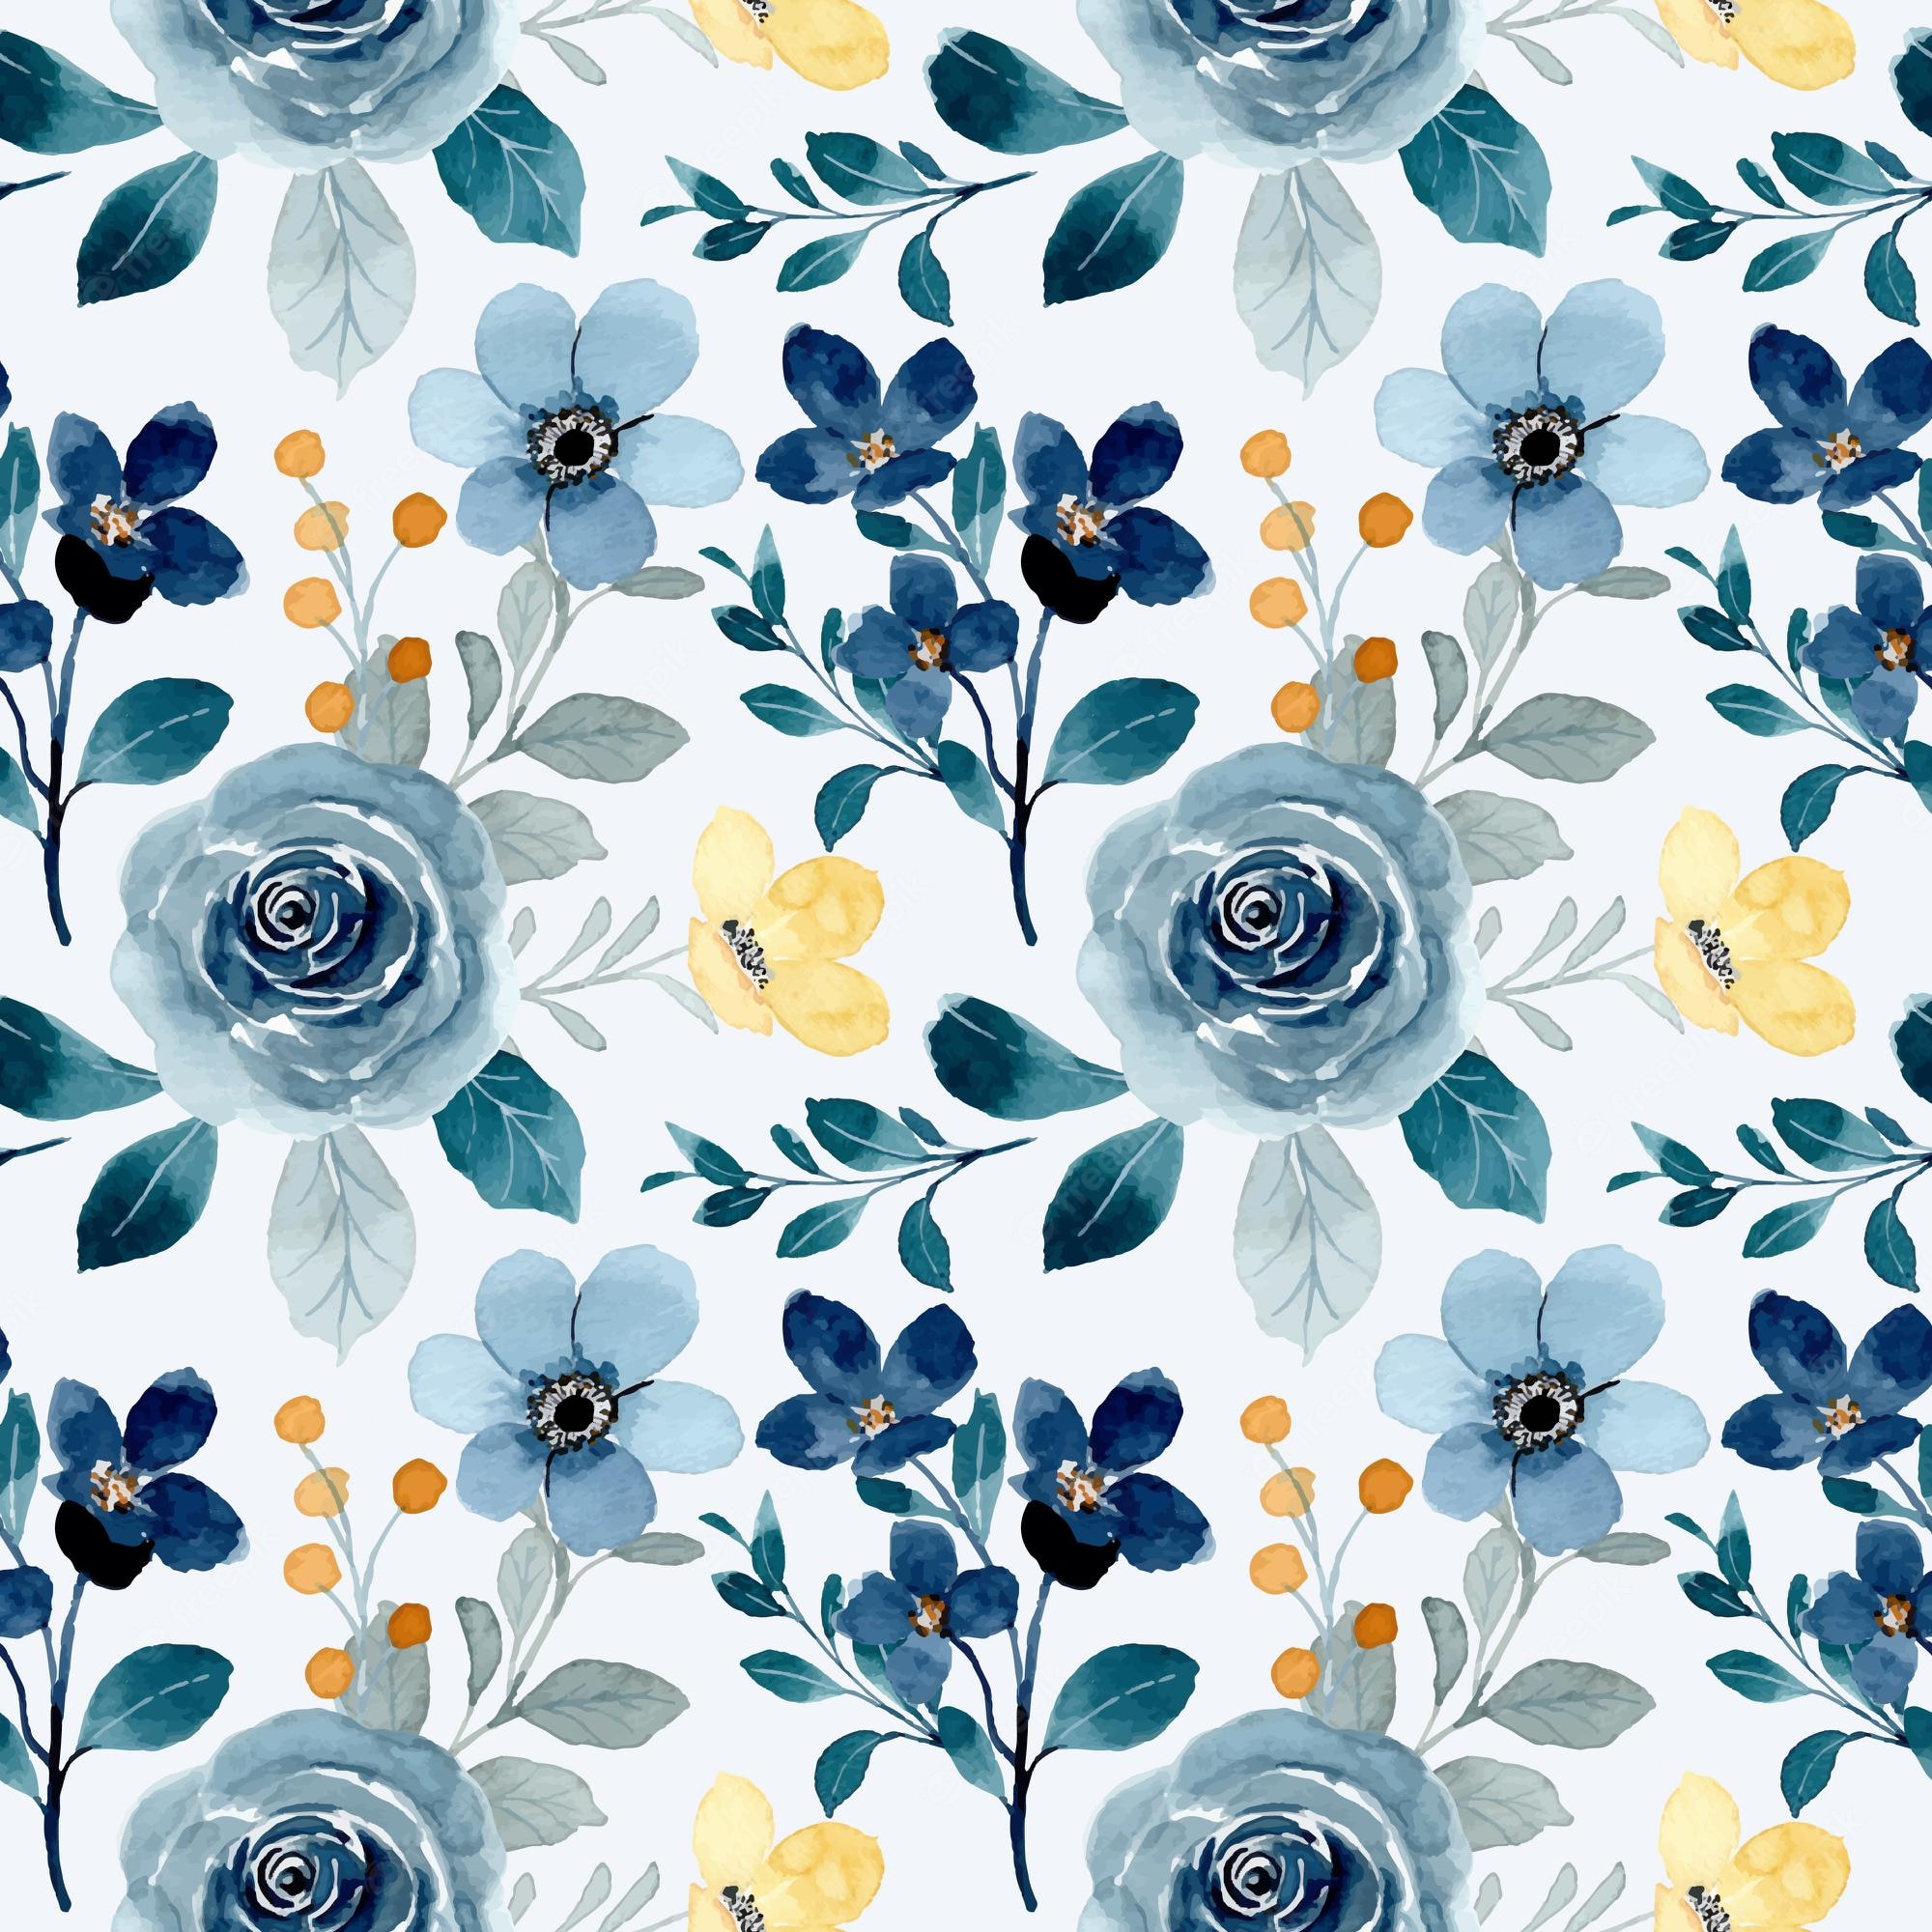 Premium Vector. Seamless pattern of blue flowers and little yellow flower with watercolor